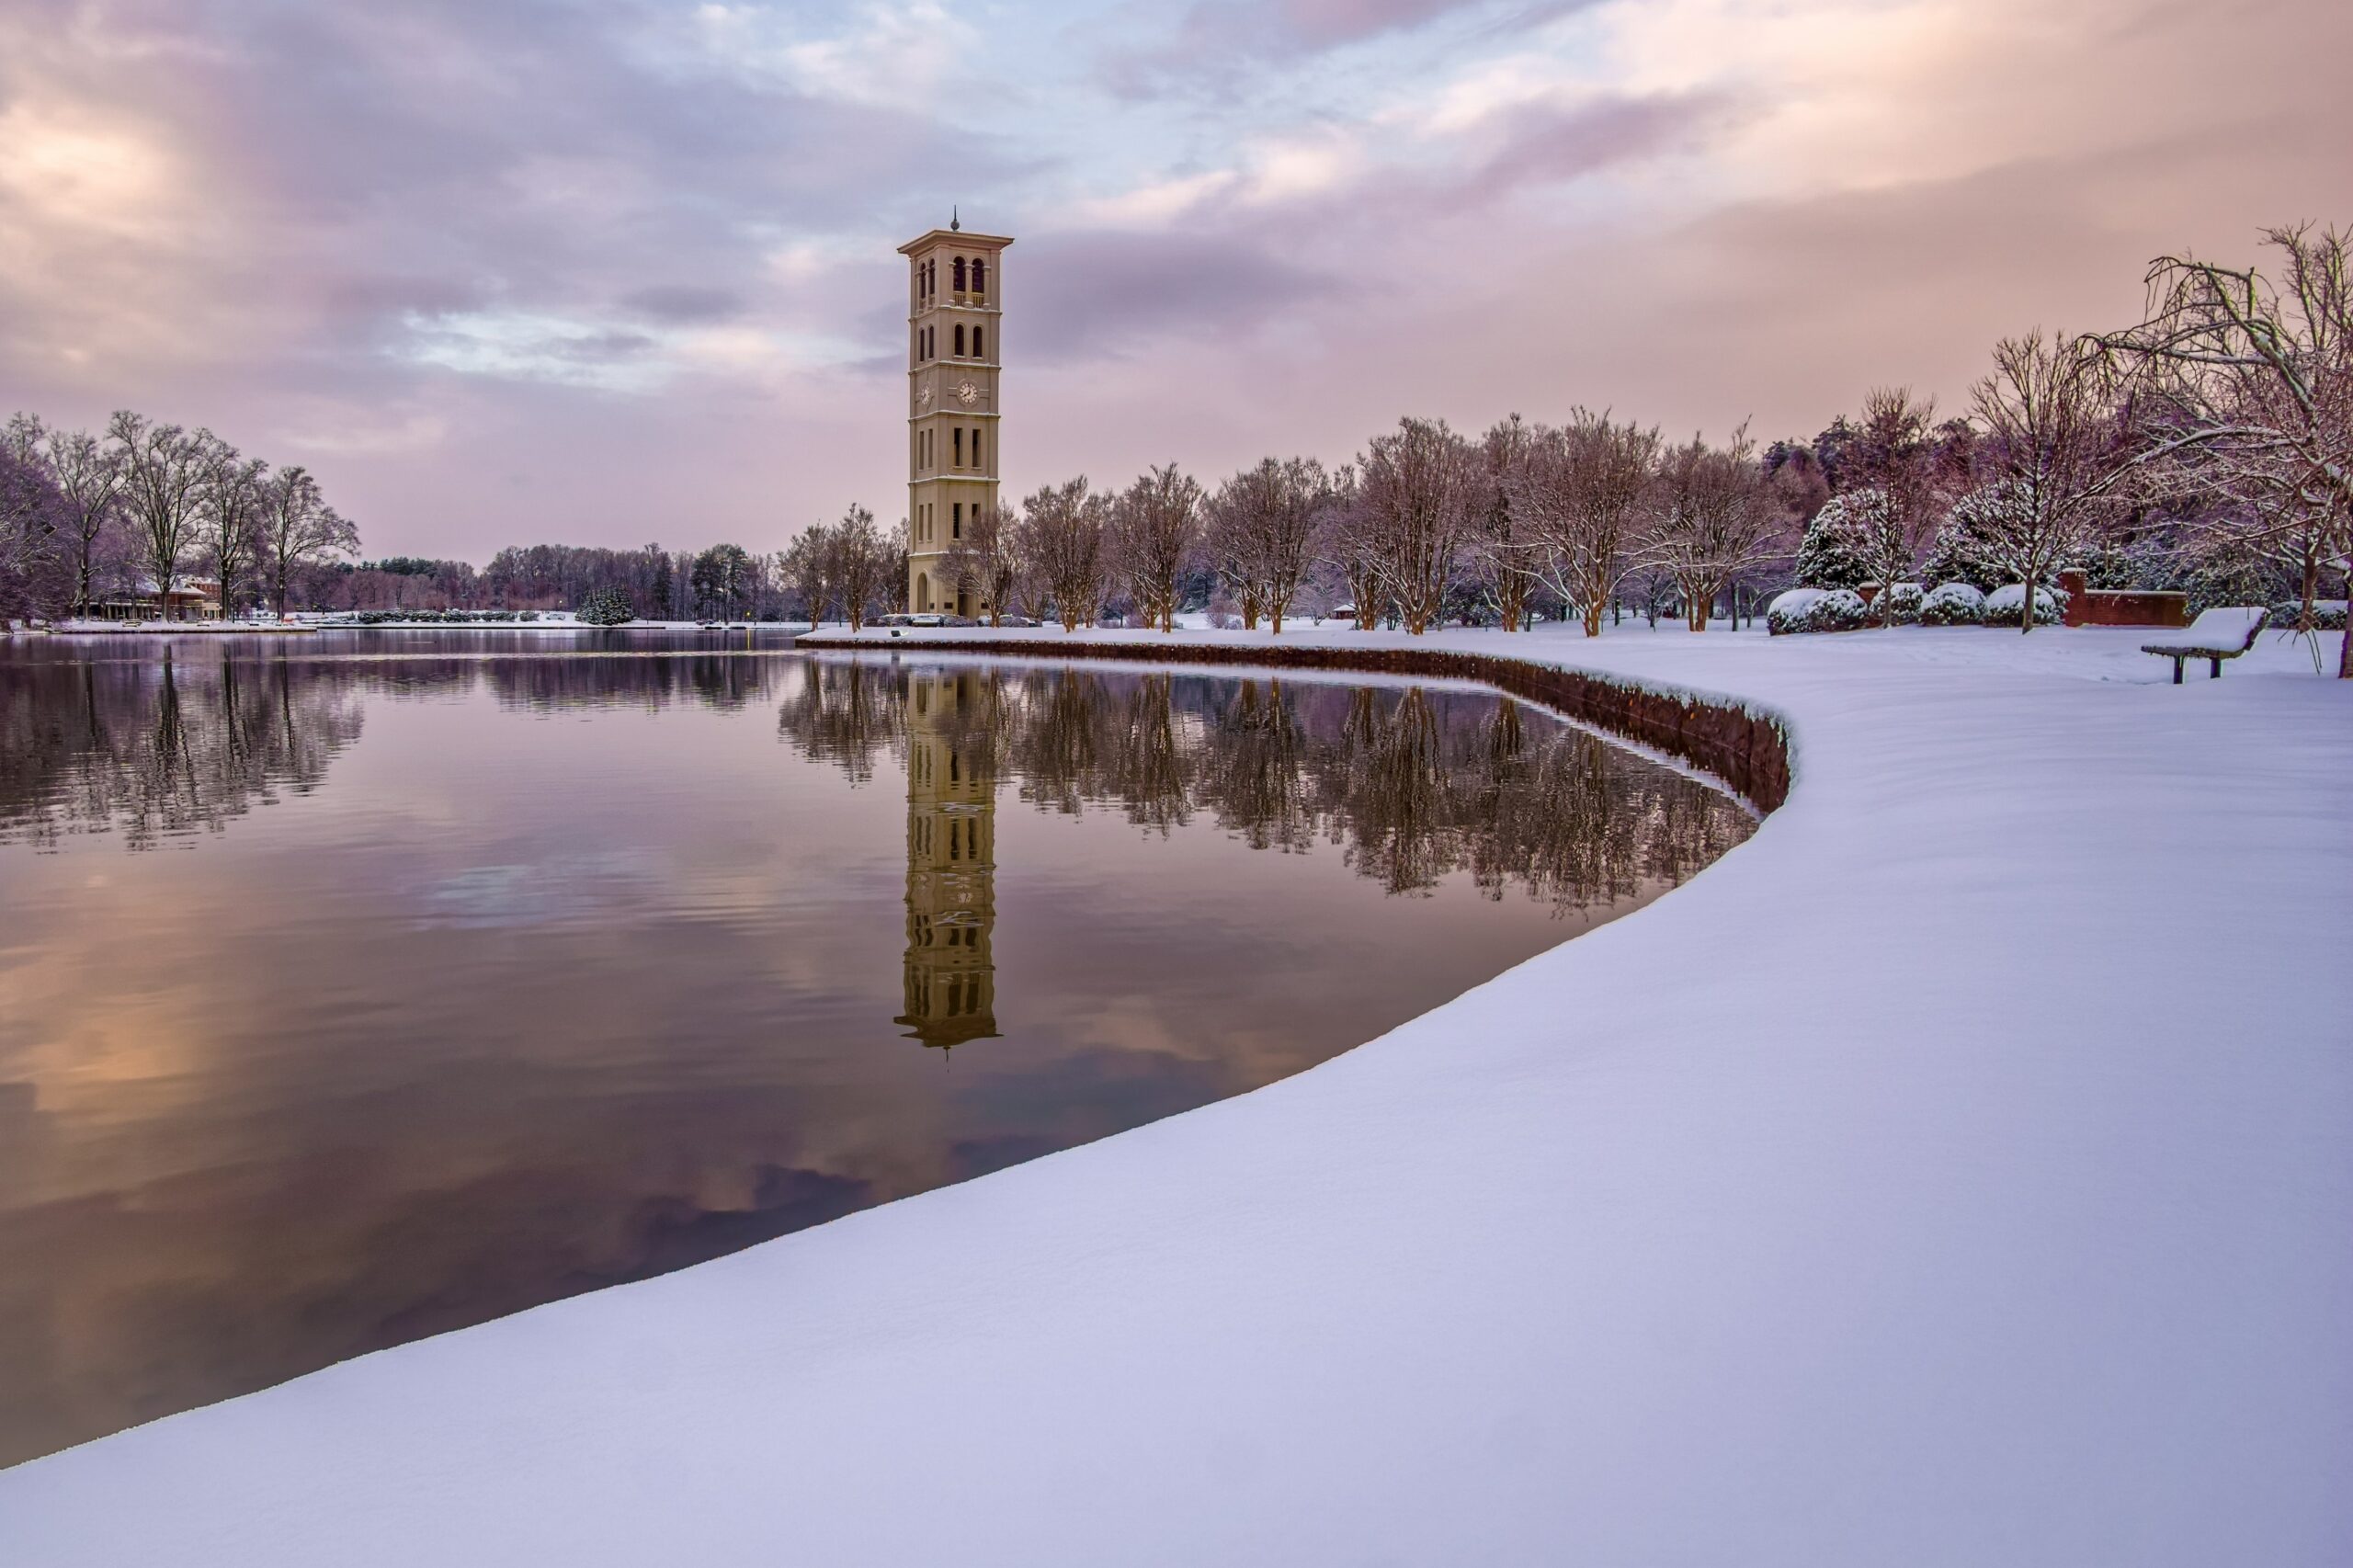 winter in the carolinas. Depicted here is the watch tower on Furman University campus